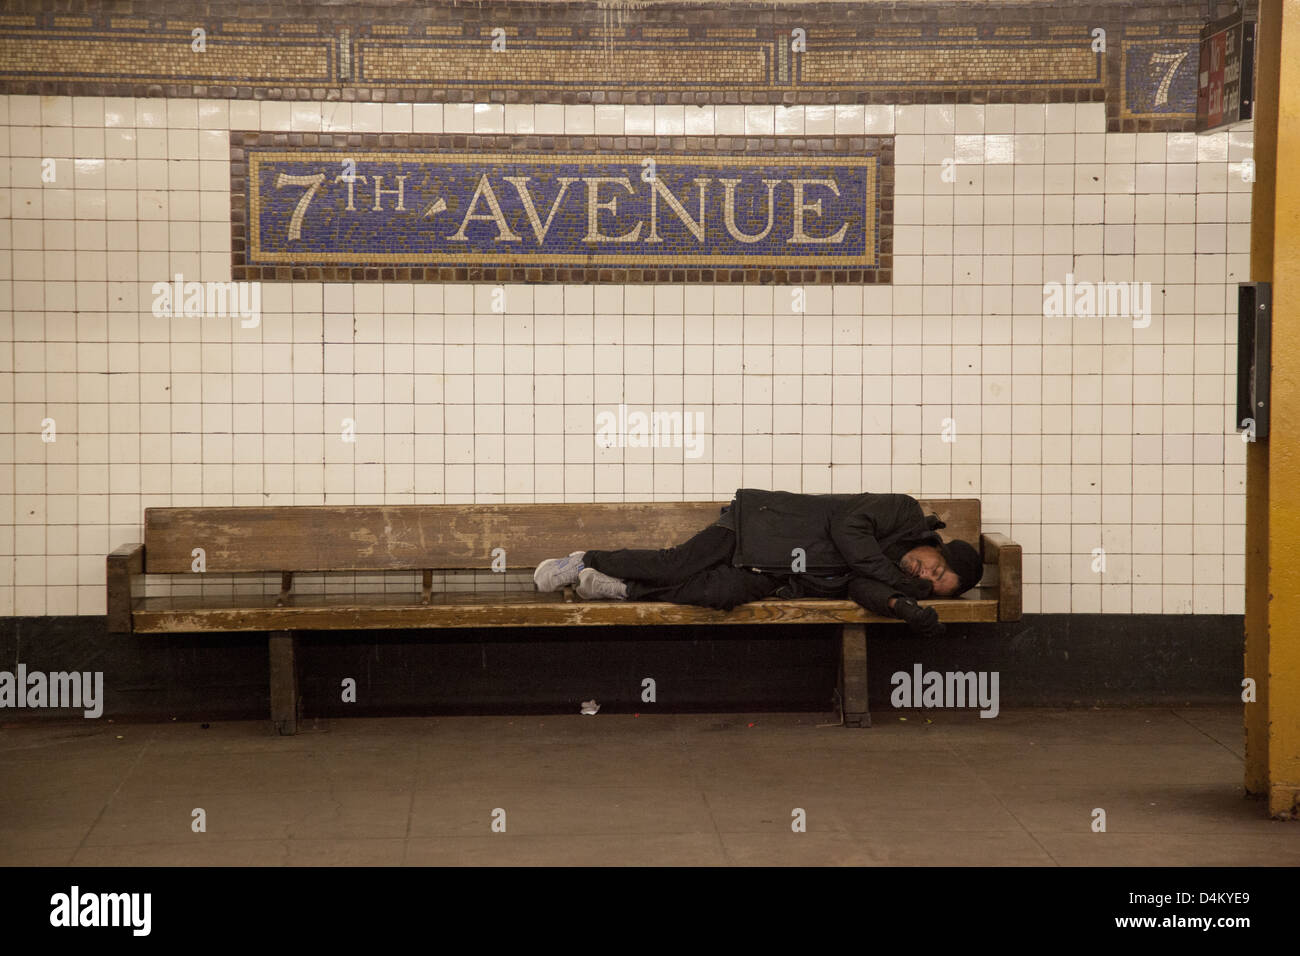 Man sleeps on a bench on the platform at the 7th Avenue subway Station in Brooklyn, New York. Stock Photo